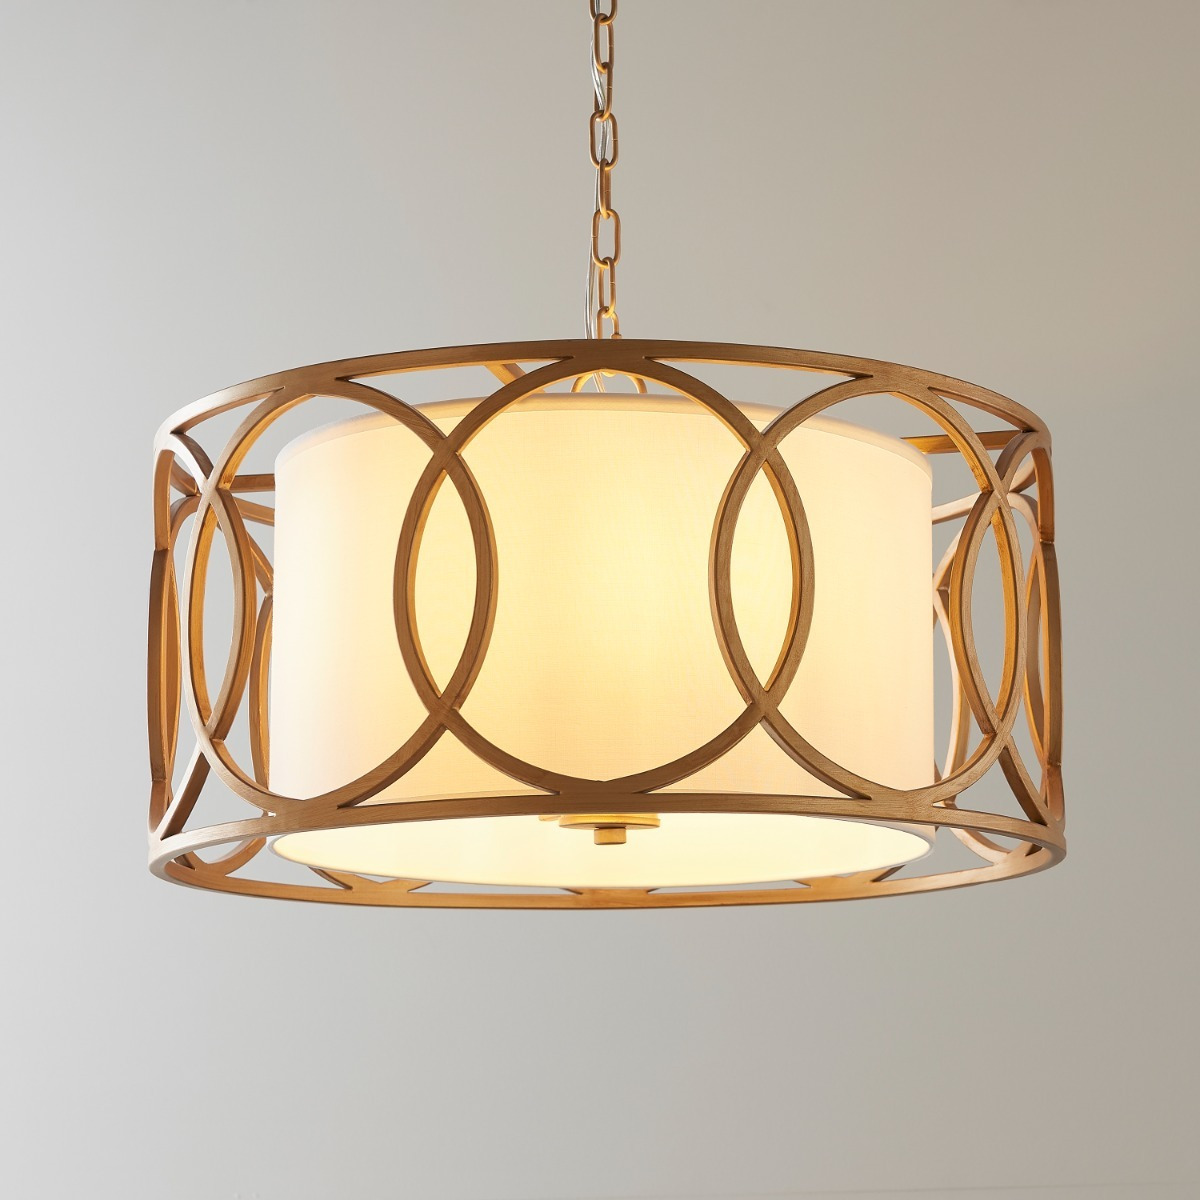 Classic Ceiling Pendant Light In Brushed Gold Finish With White Fabric Shade